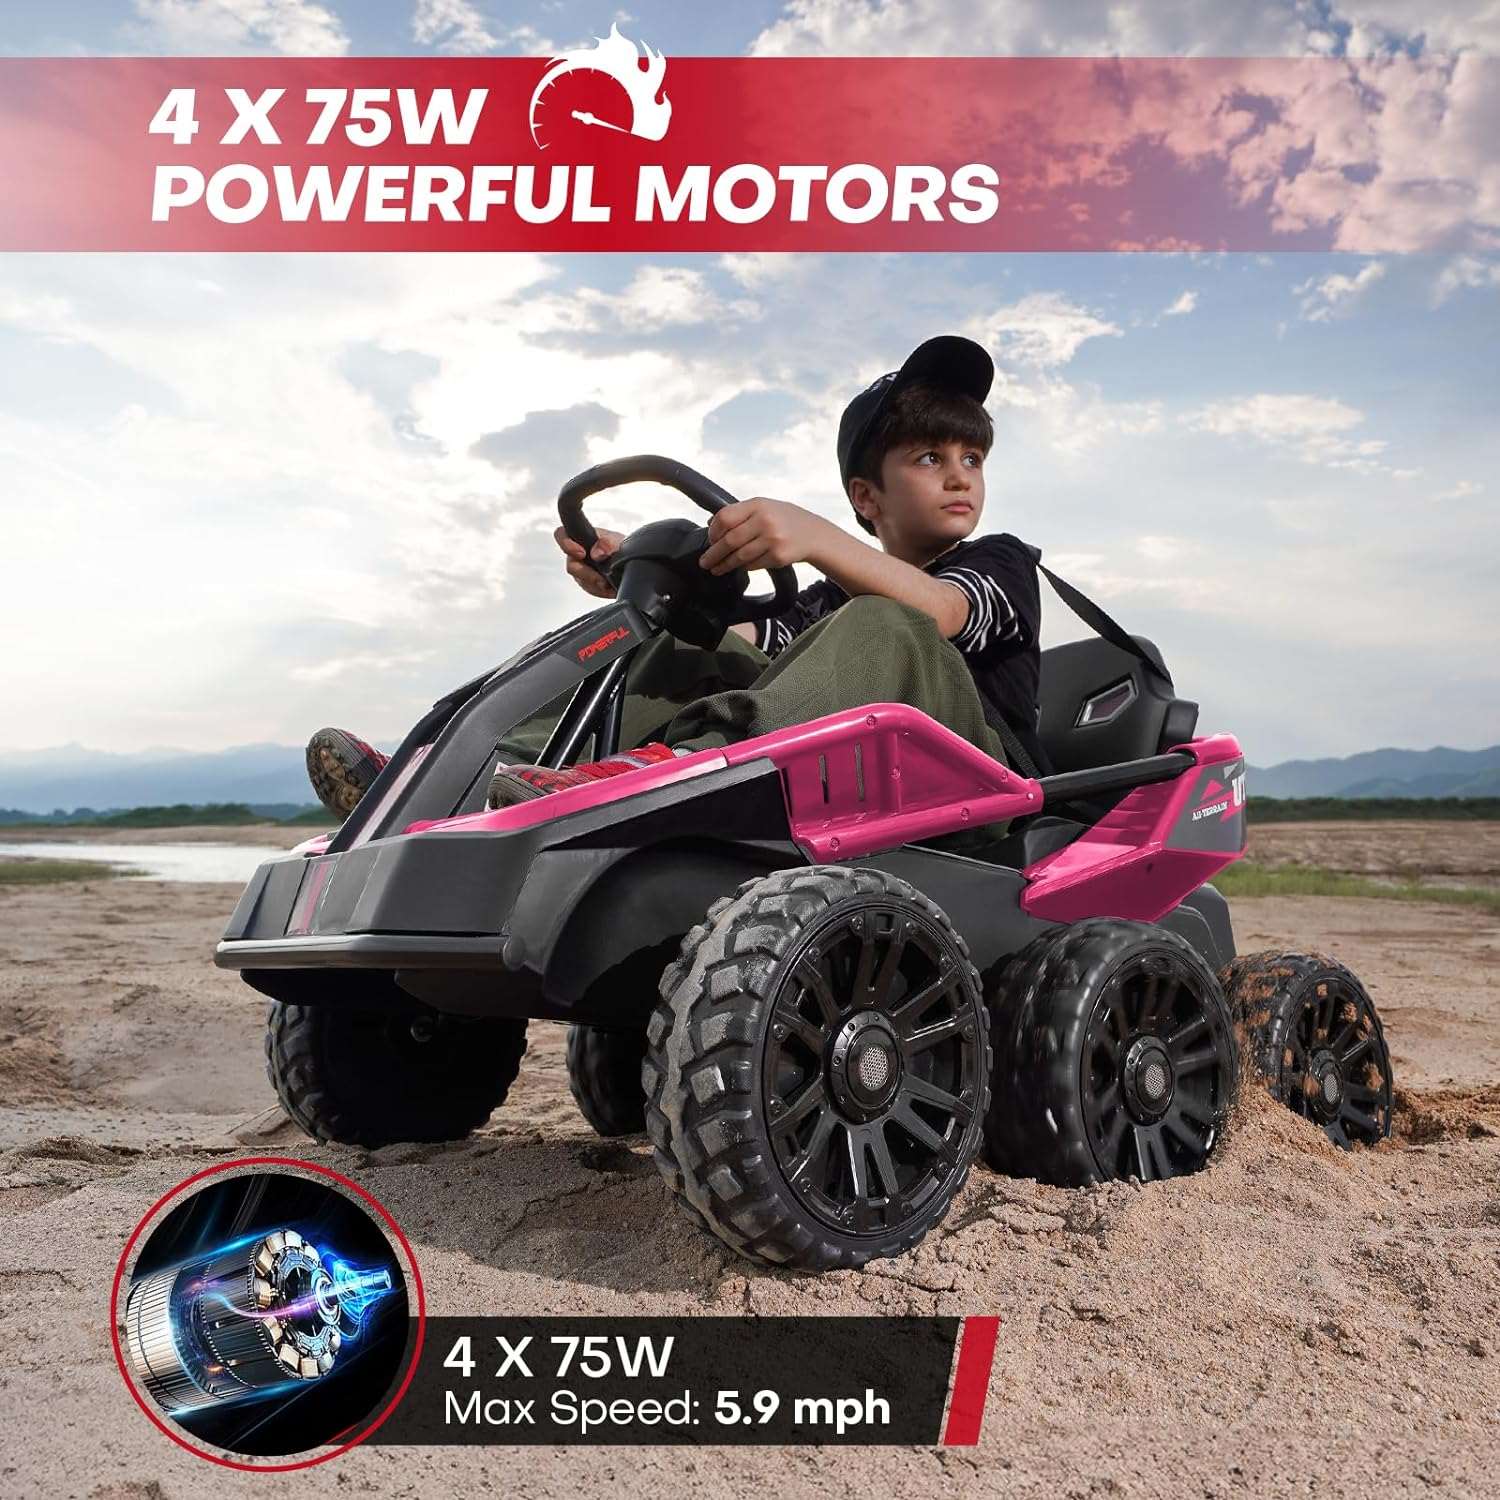 24V 6x6 Ride On Car for Big Kids, 4x75W 5.9MPH Ride on Toy, 2WD/4WD Switchable Electric UTV with Parent Remote, Eva Tires - Cykapu